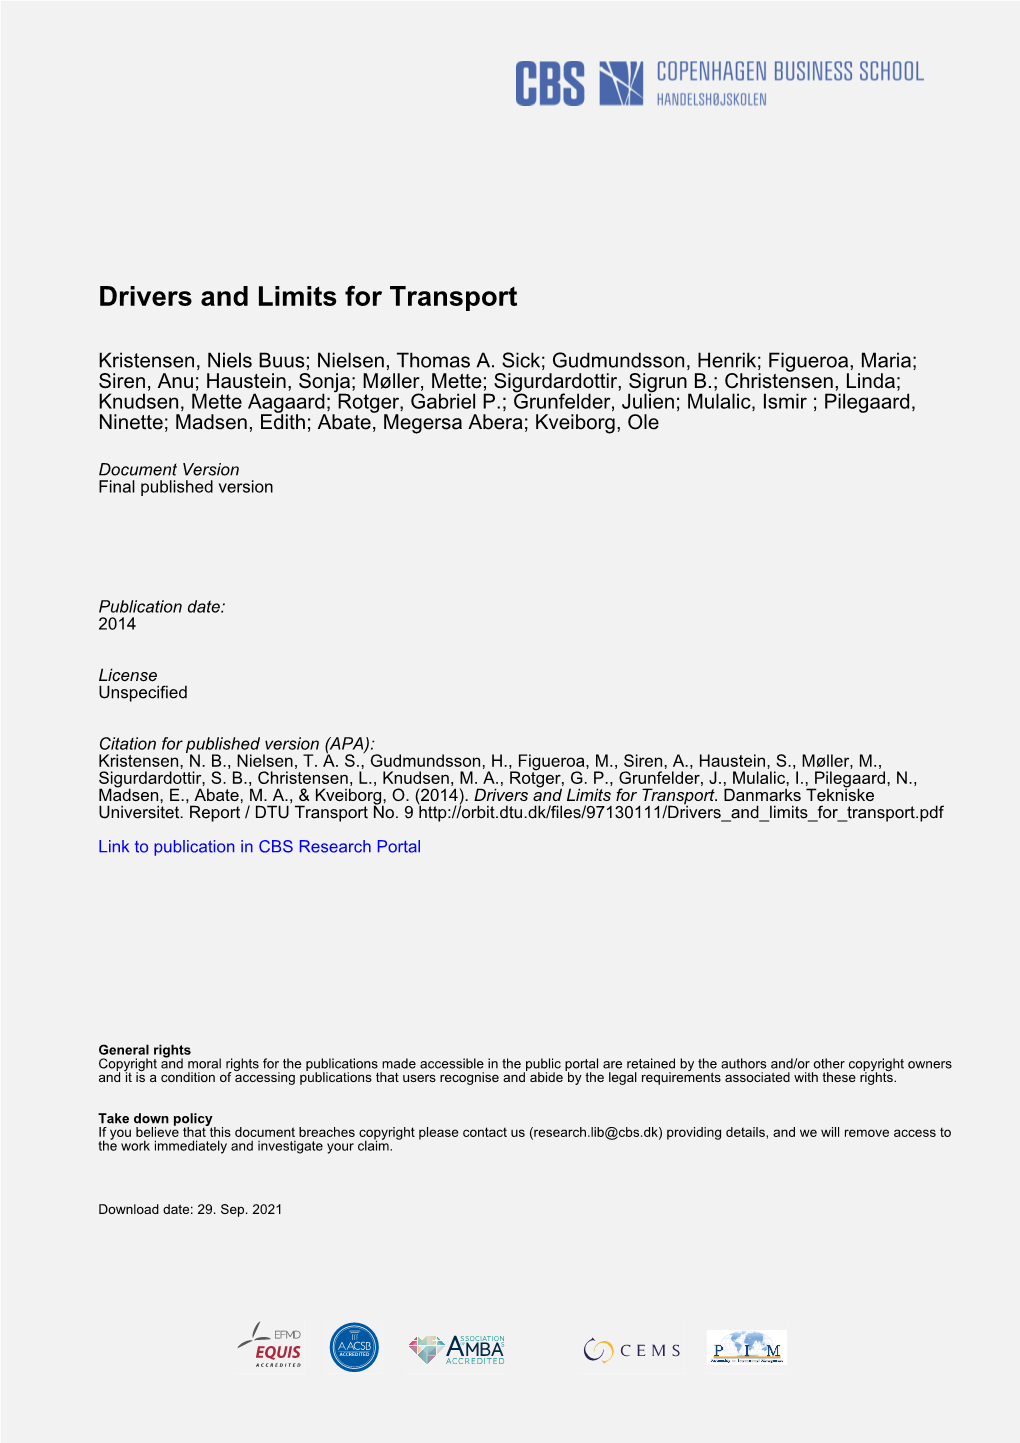 Drivers and Limits for Transport